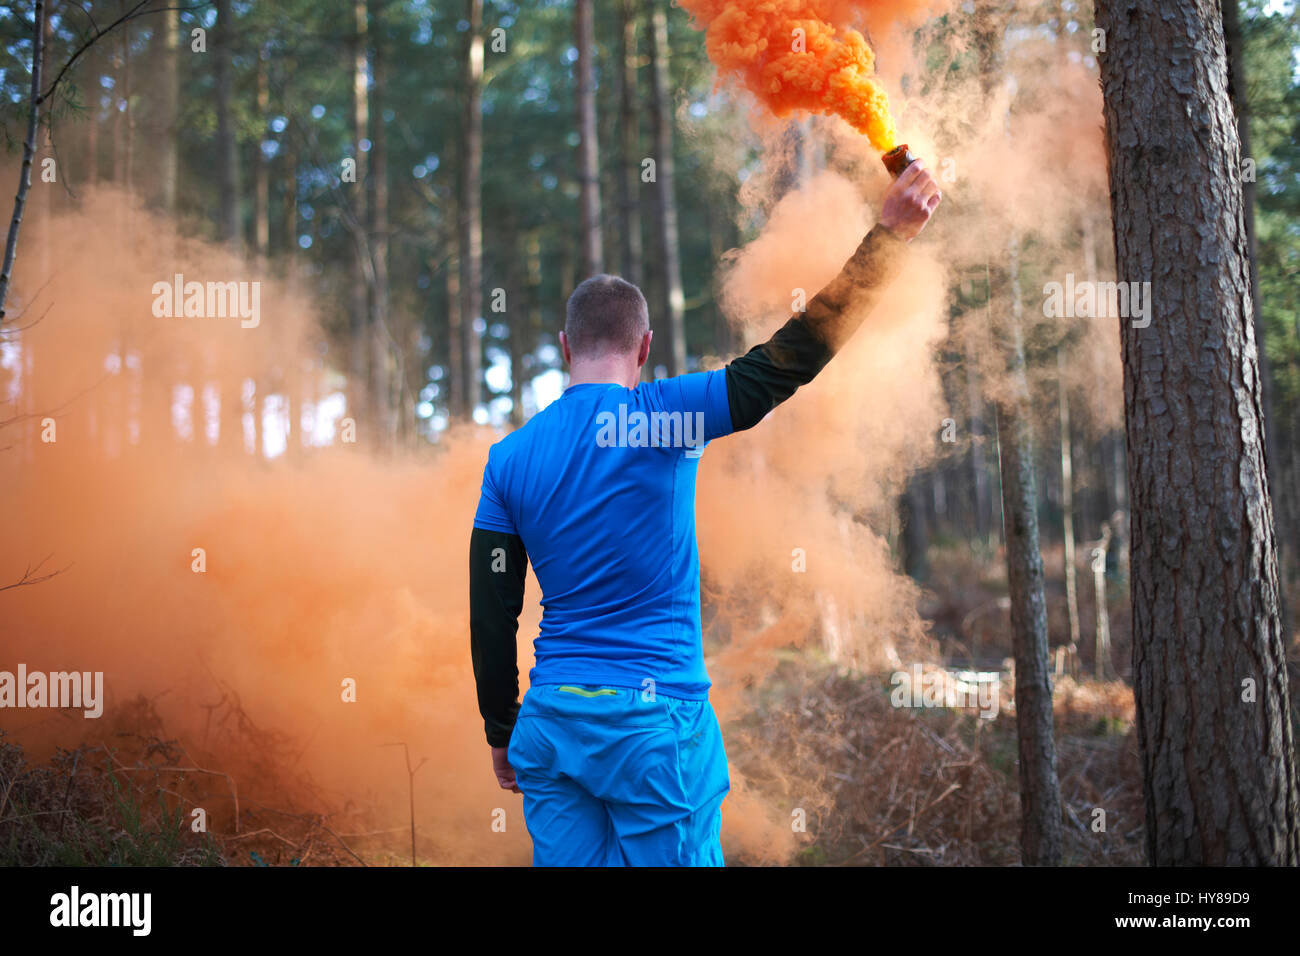 A man lets off a flare in the woods Stock Photo